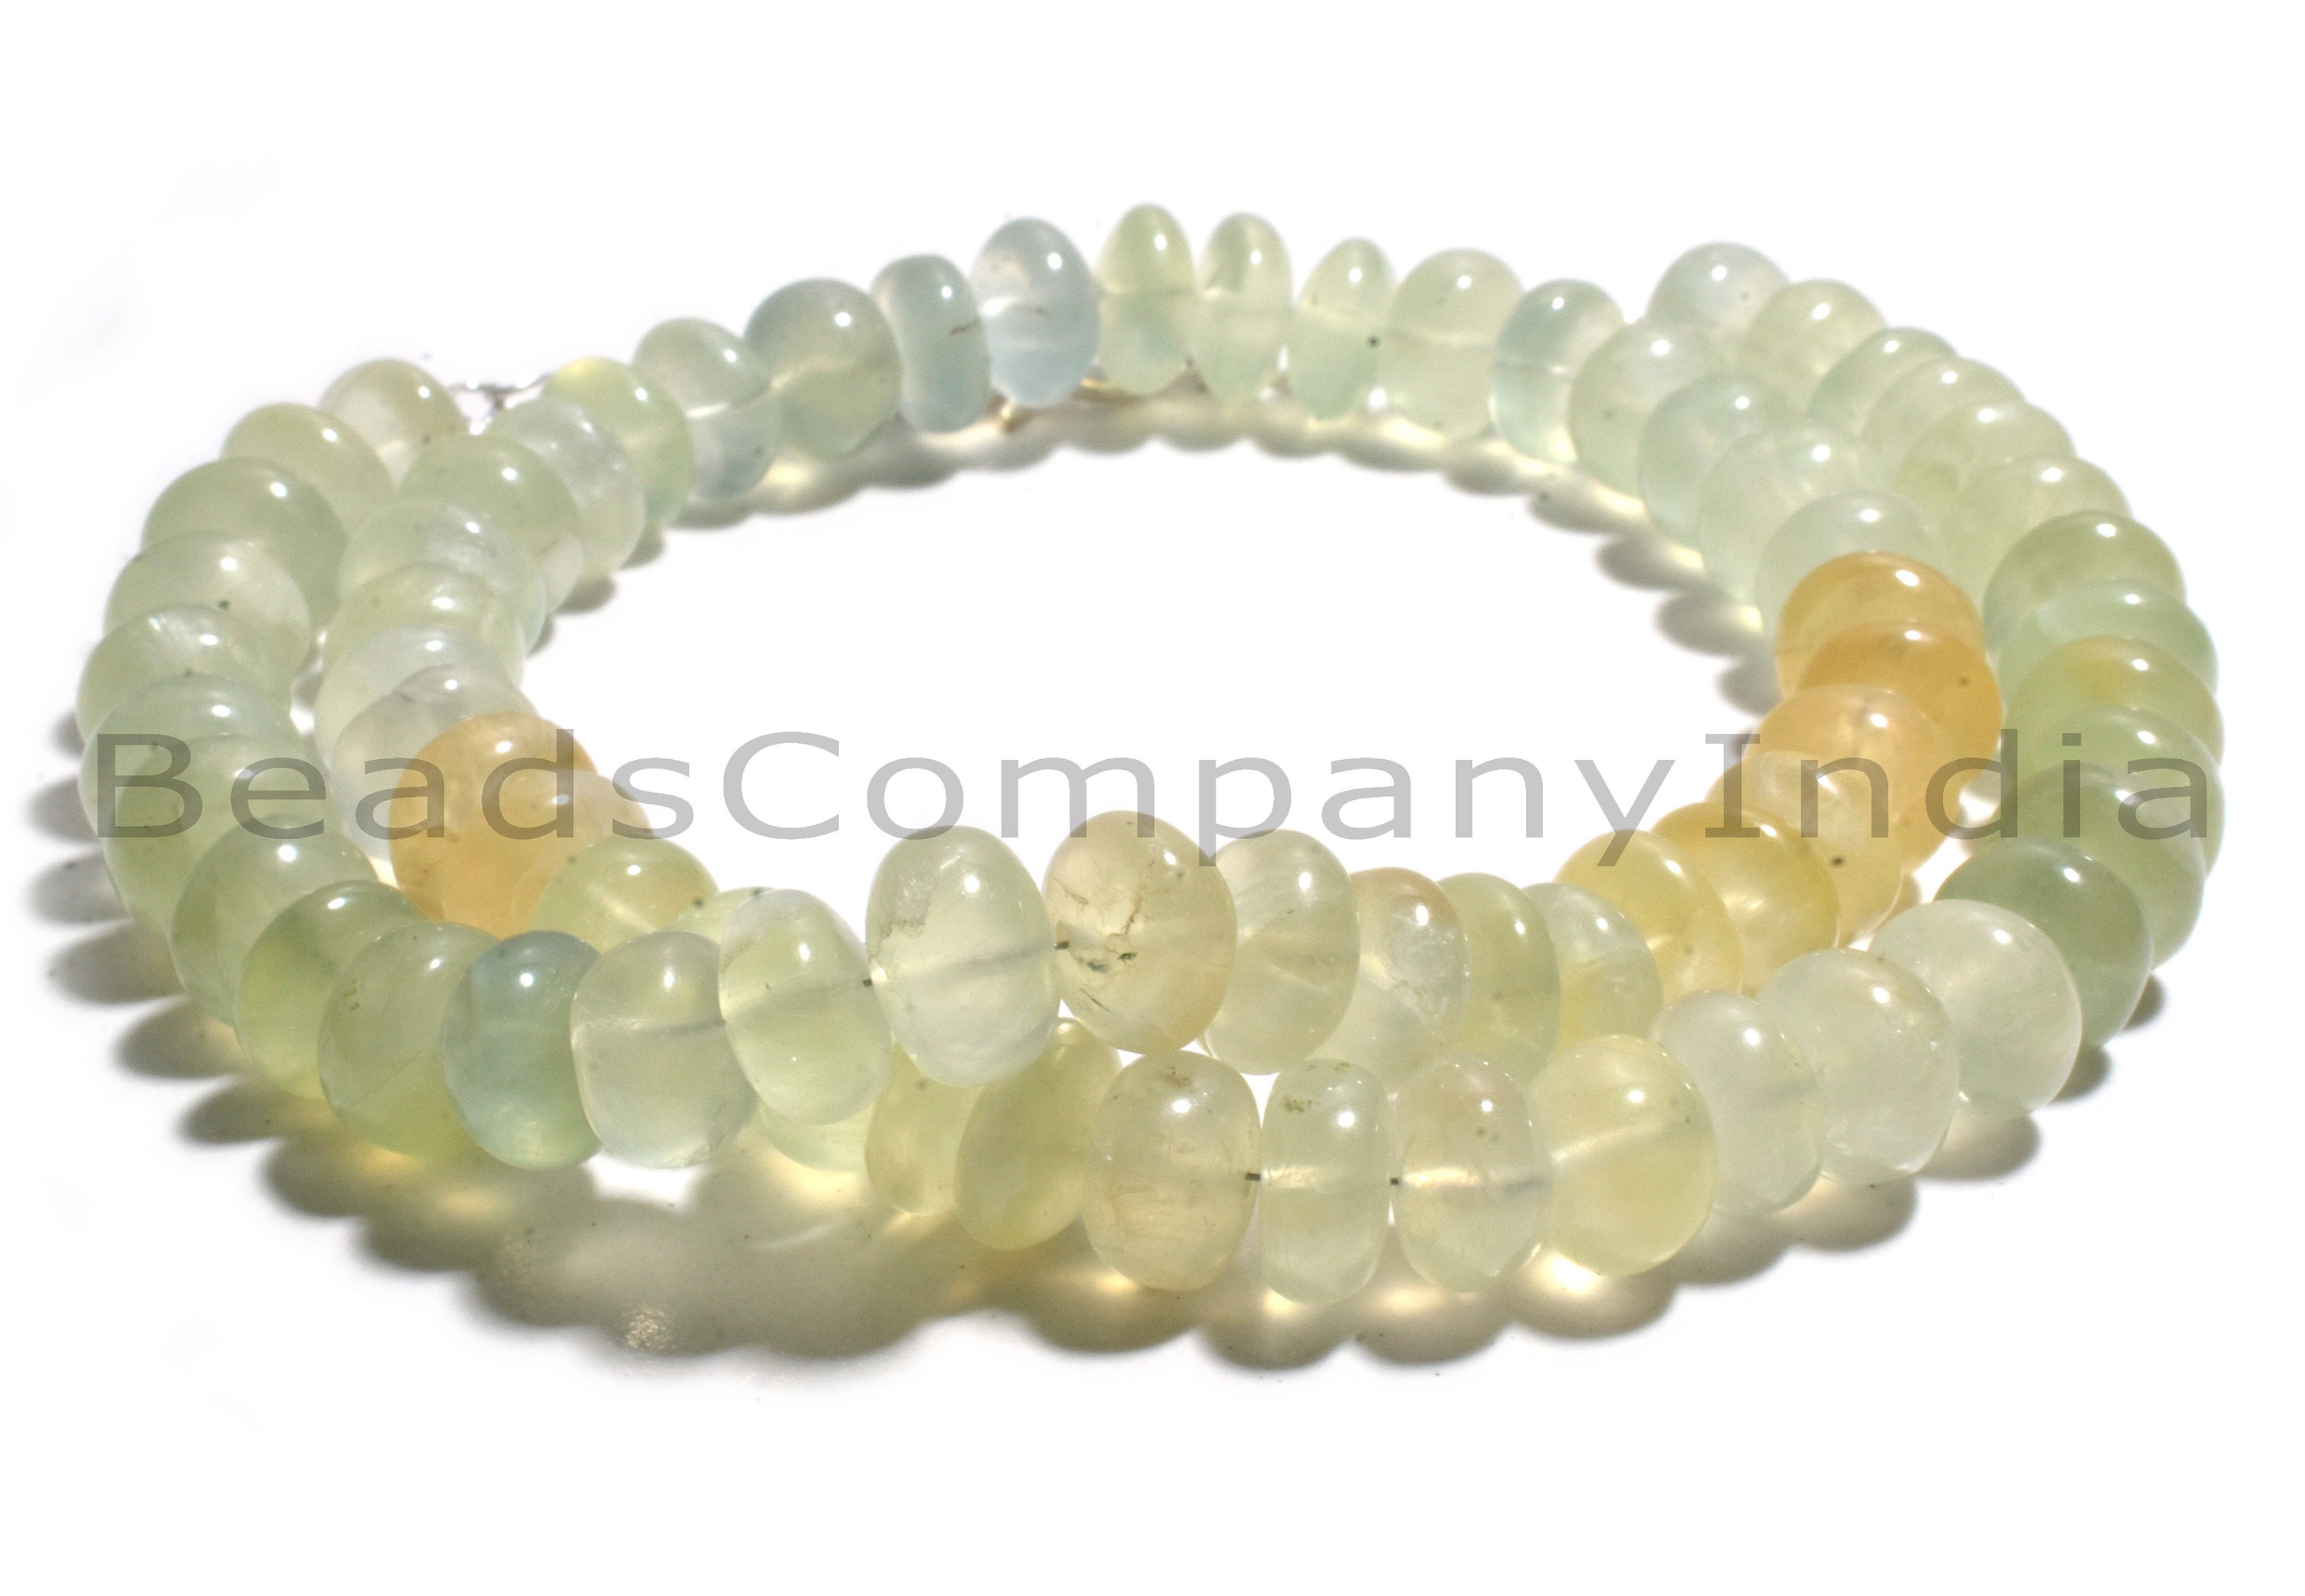 9.5-10 MM Superb Item At Low Price 359 Cts 16 Inches Strand Quality Prehnite Necklace Natural Prehnite Smooth Rondelle Beads